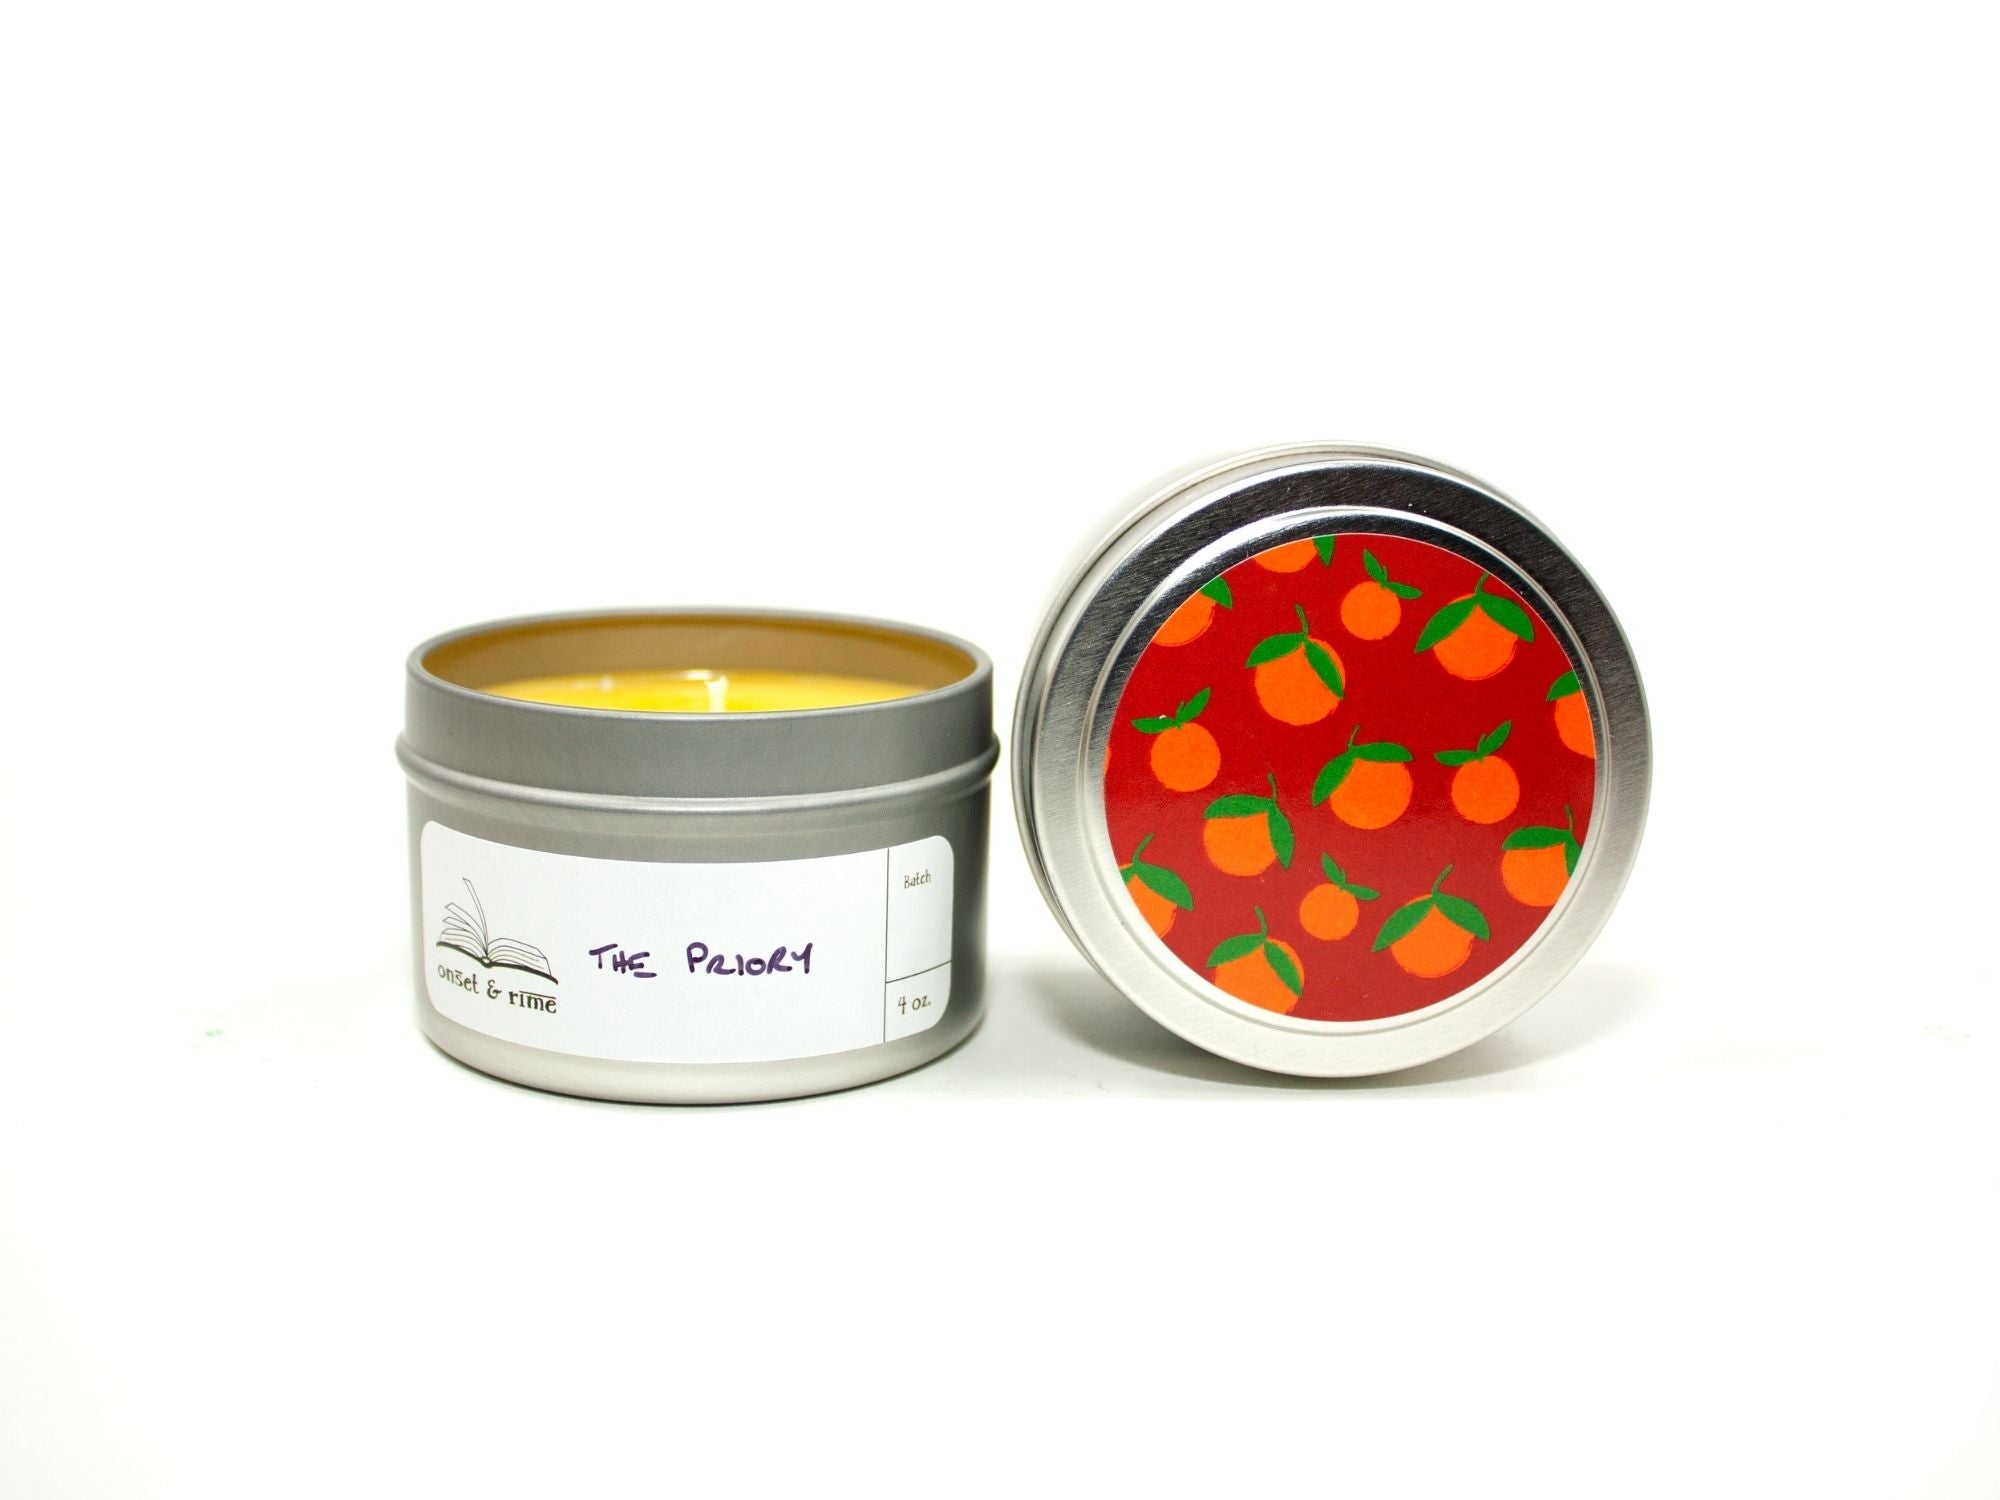 Onset & Rime spiced orange scented candle called "The Priory" in a 4 oz silver tin. The circular label on top is red with a pattern of oranges. The scent name is handwritten on a white rectangular label on the side of the tin.